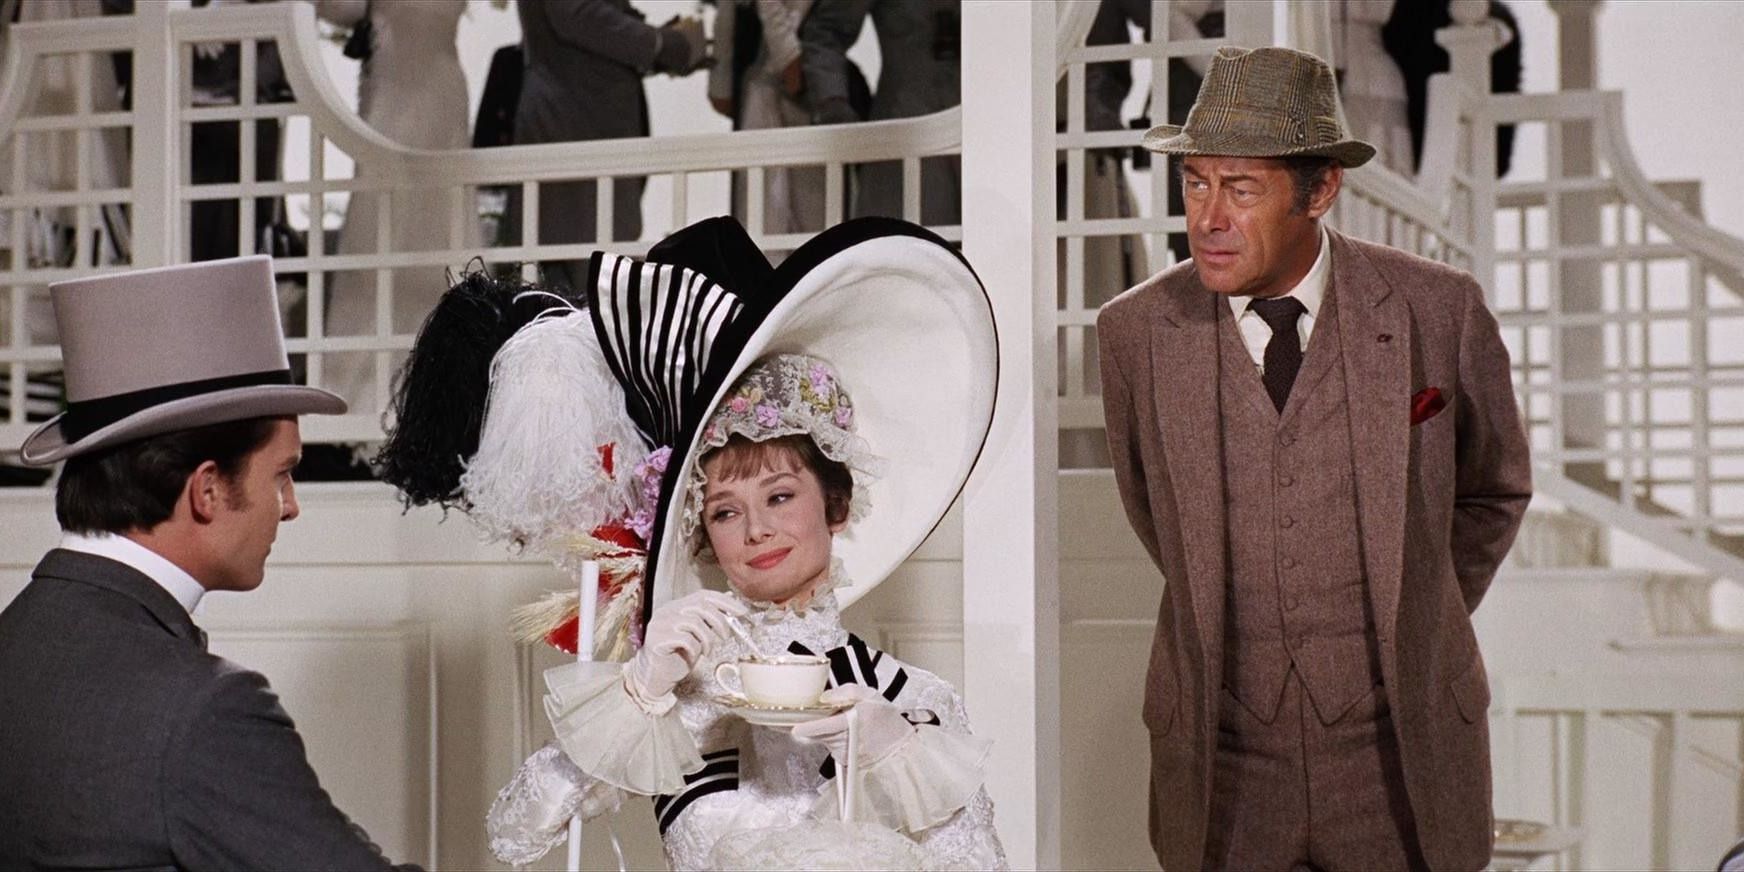 Audrey Hepburn in My Fair Lady wearing an iconic white dress